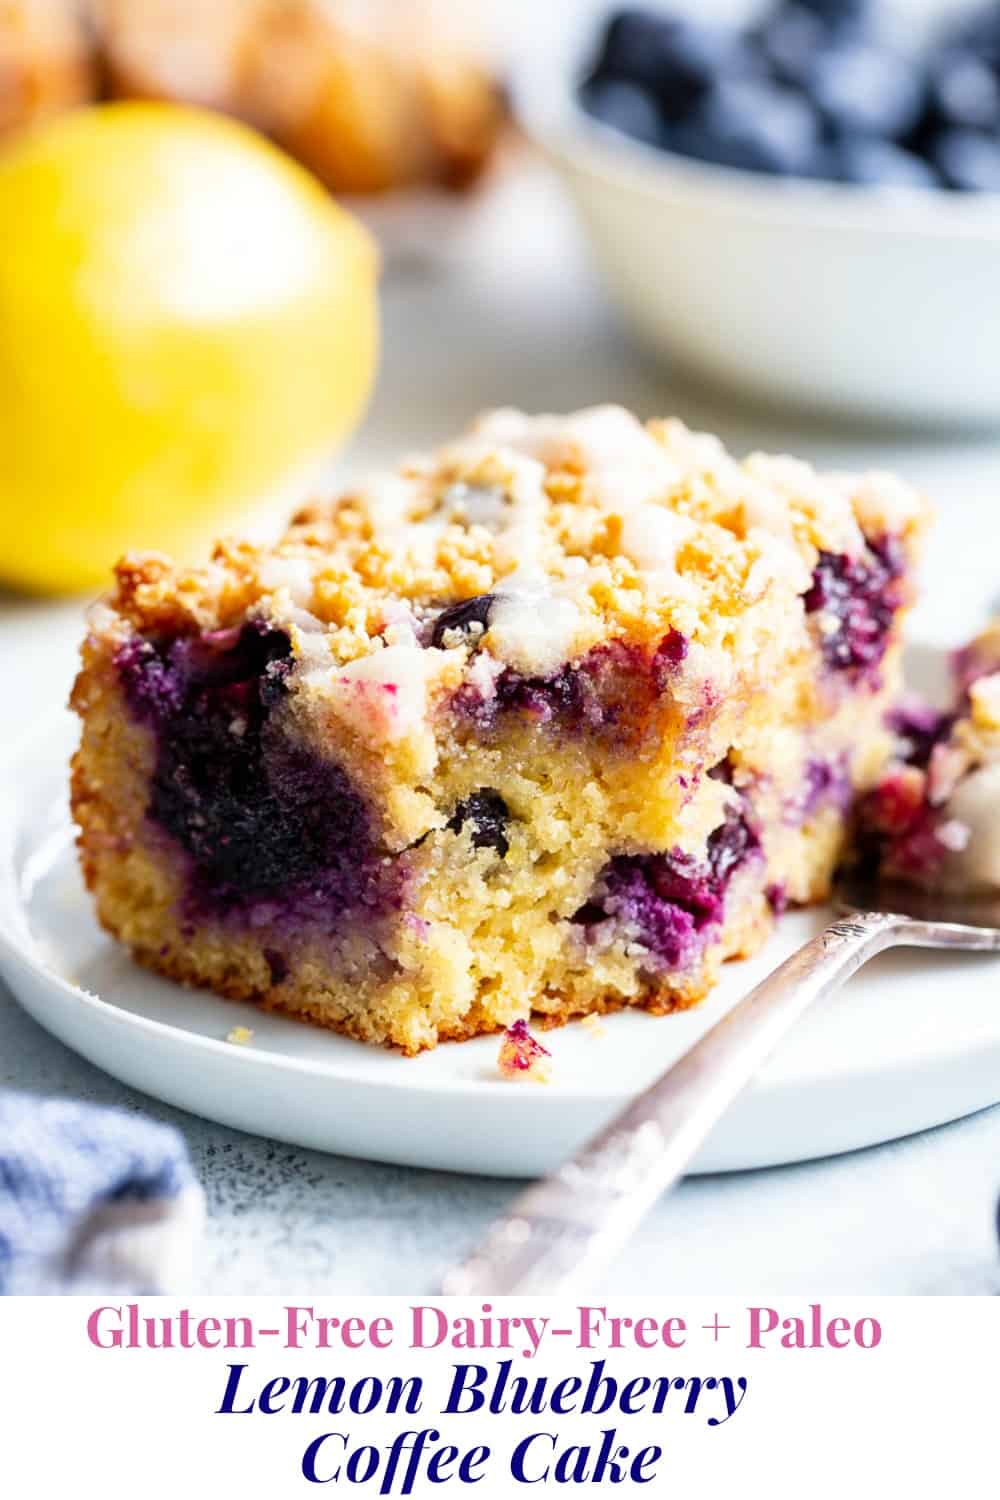 This Lemon Blueberry Coffee Cake is bursting with fresh lemon flavor and juicy blueberries!  It starts with a  perfectly moist lemon almond cake layer with fresh blueberries piled with crumb topping and drizzled with lemon glaze.  It’s gluten-free and paleo and will become a favorite dessert or breakfast treat with the first bite!  #cleaneating #paleo #kingarthurflour @kingarthurflour #AD